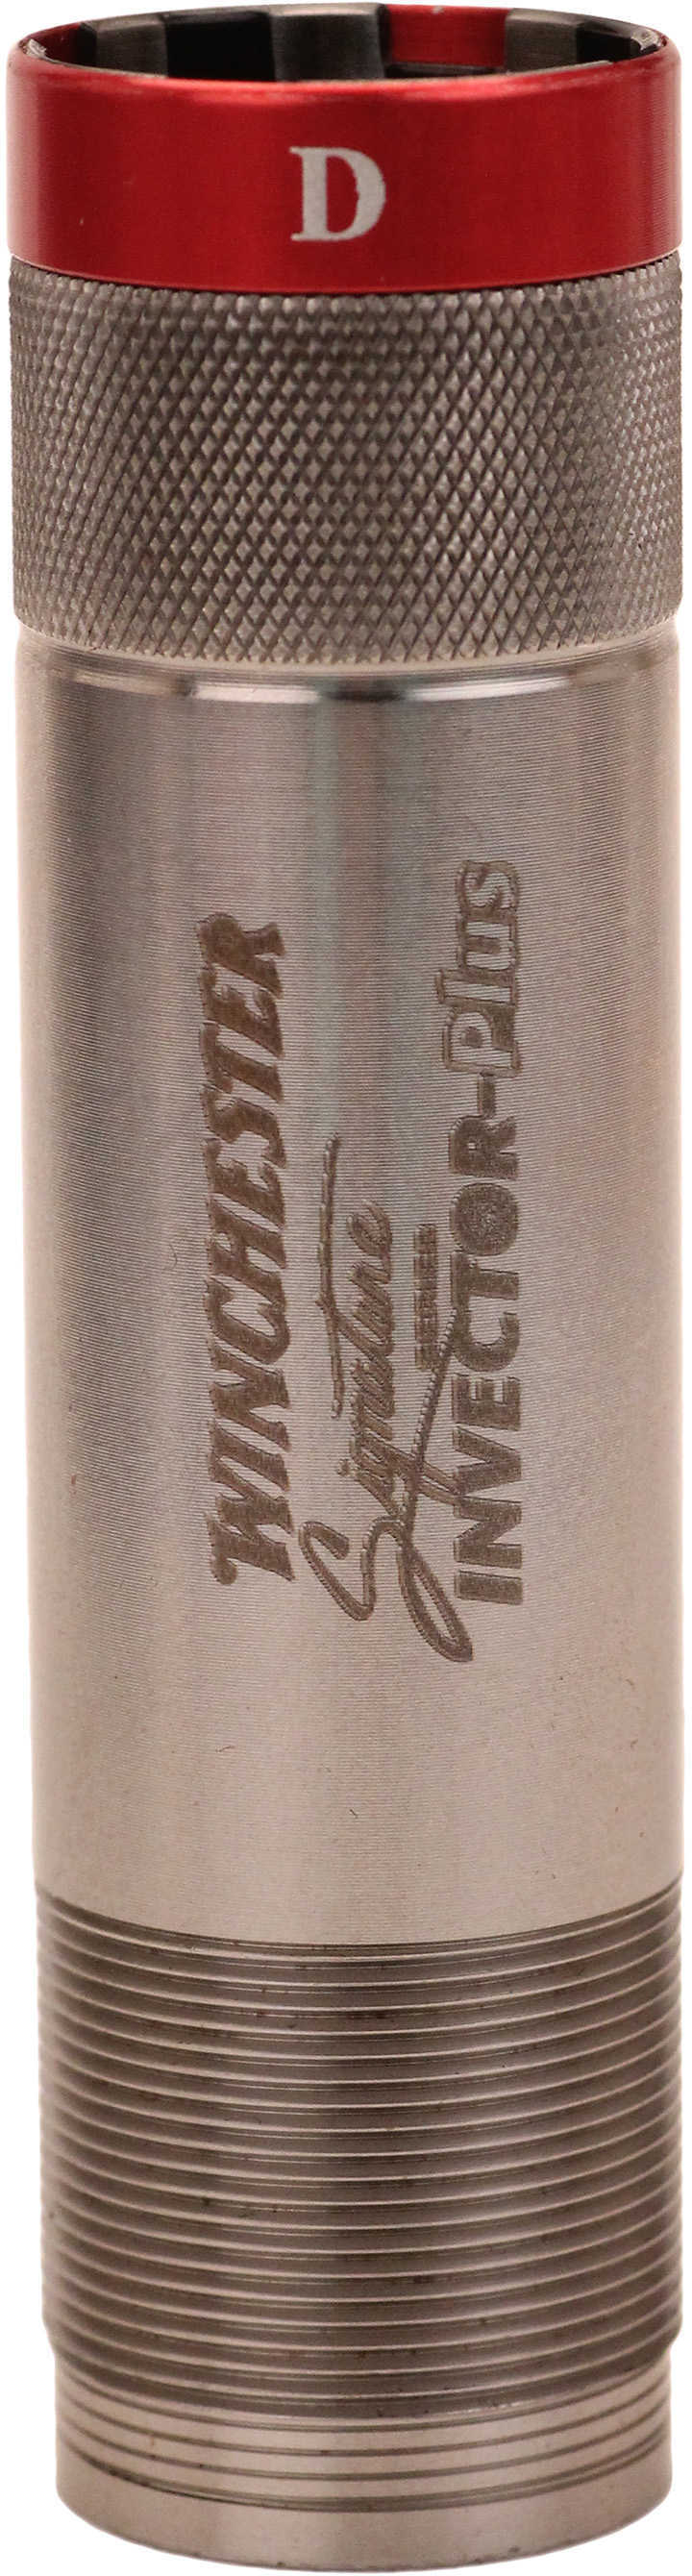 Winchester Signature Series Invector+ Spreader 12 Gauge Choke Tube Md: 6130793